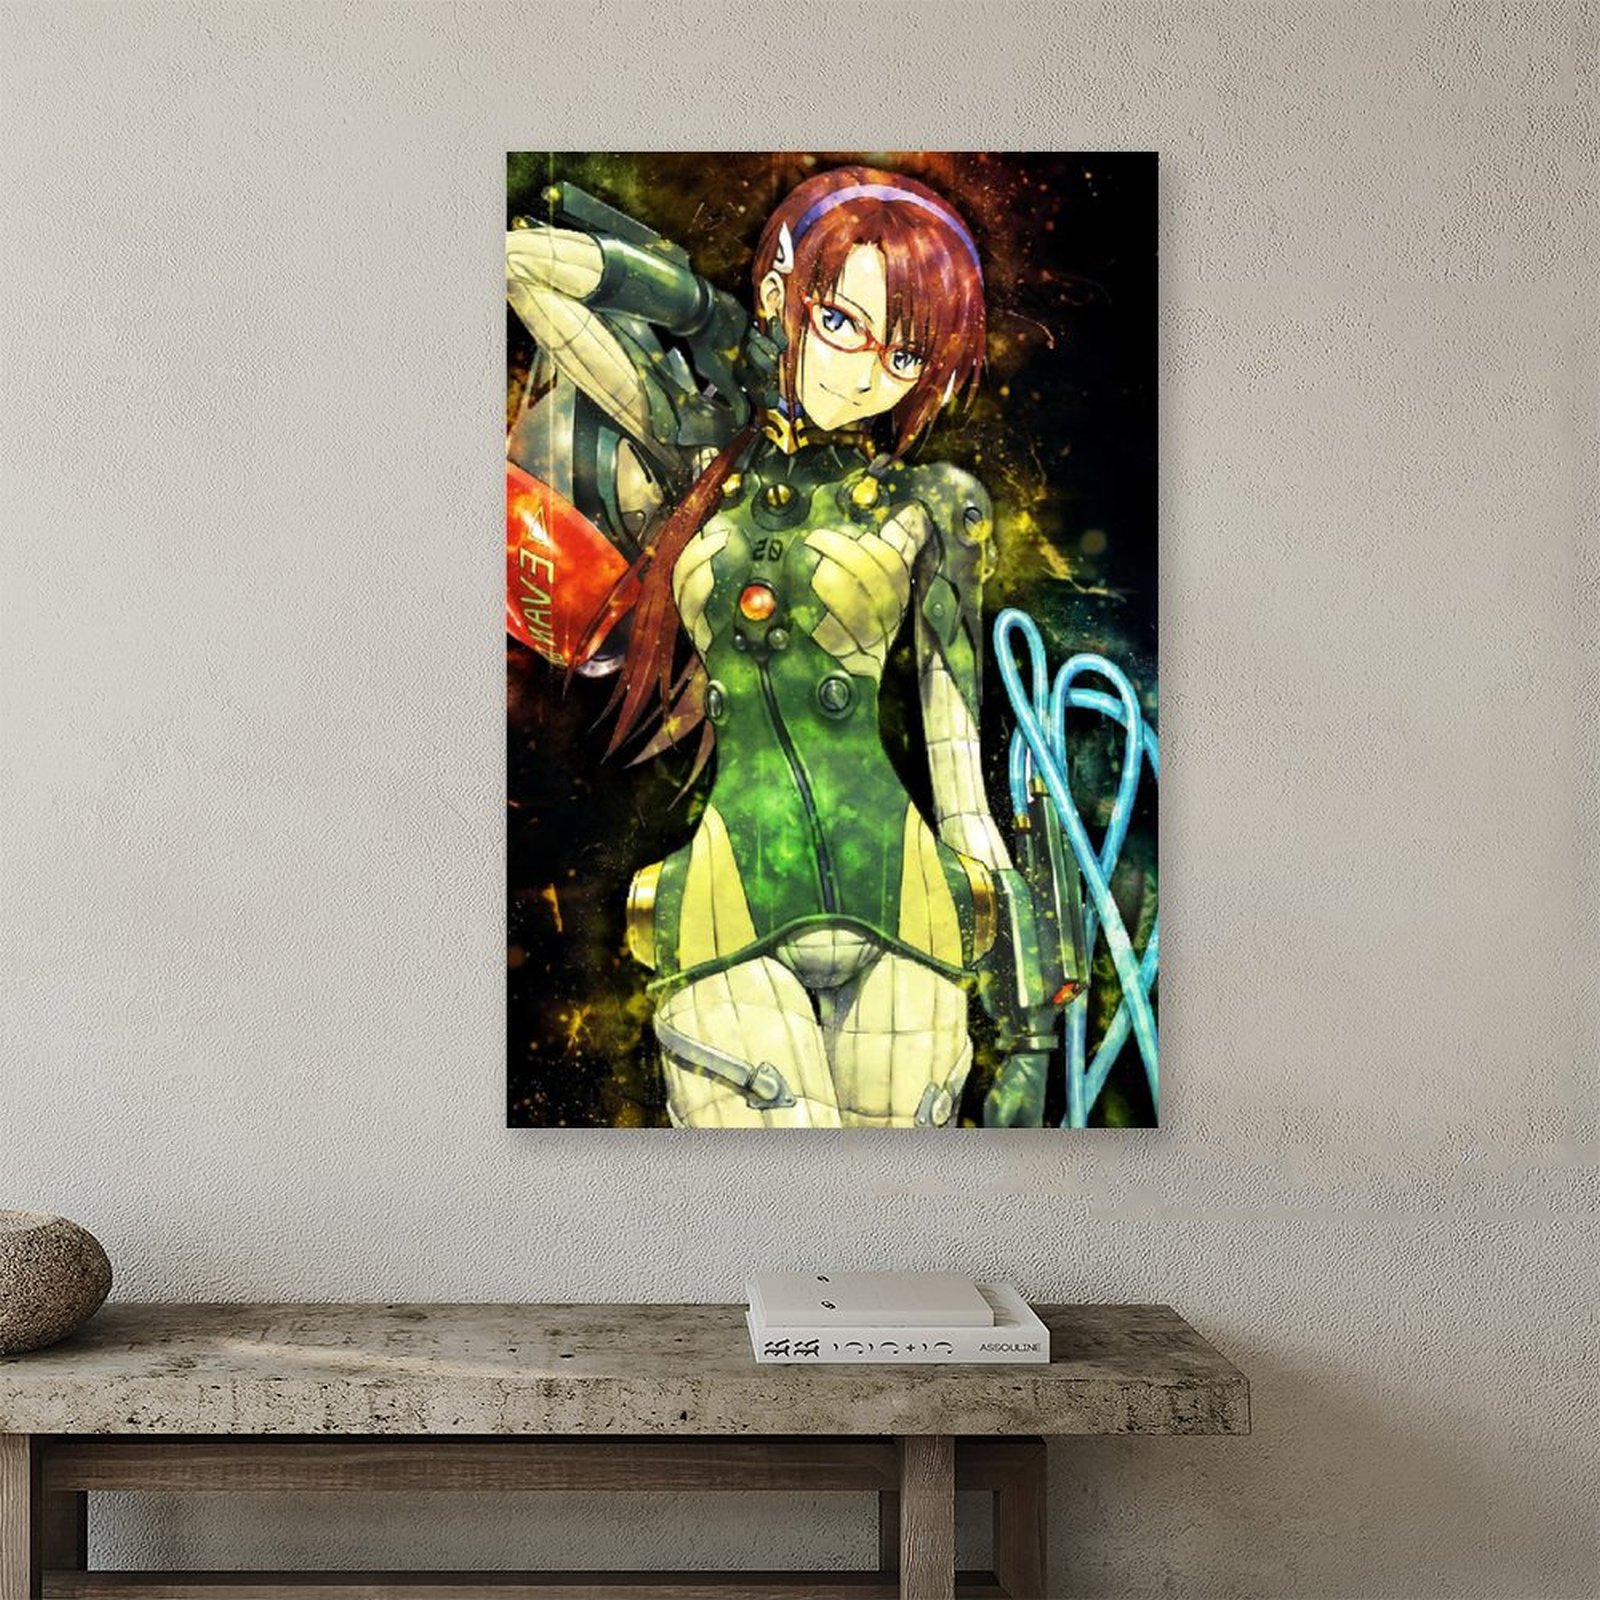 Anime Evangelion Girl MakinamiCanvas Painting Wall Art Posters and Prints Wall Pictures for Living Room Decoration 3 - Evangelion Shop